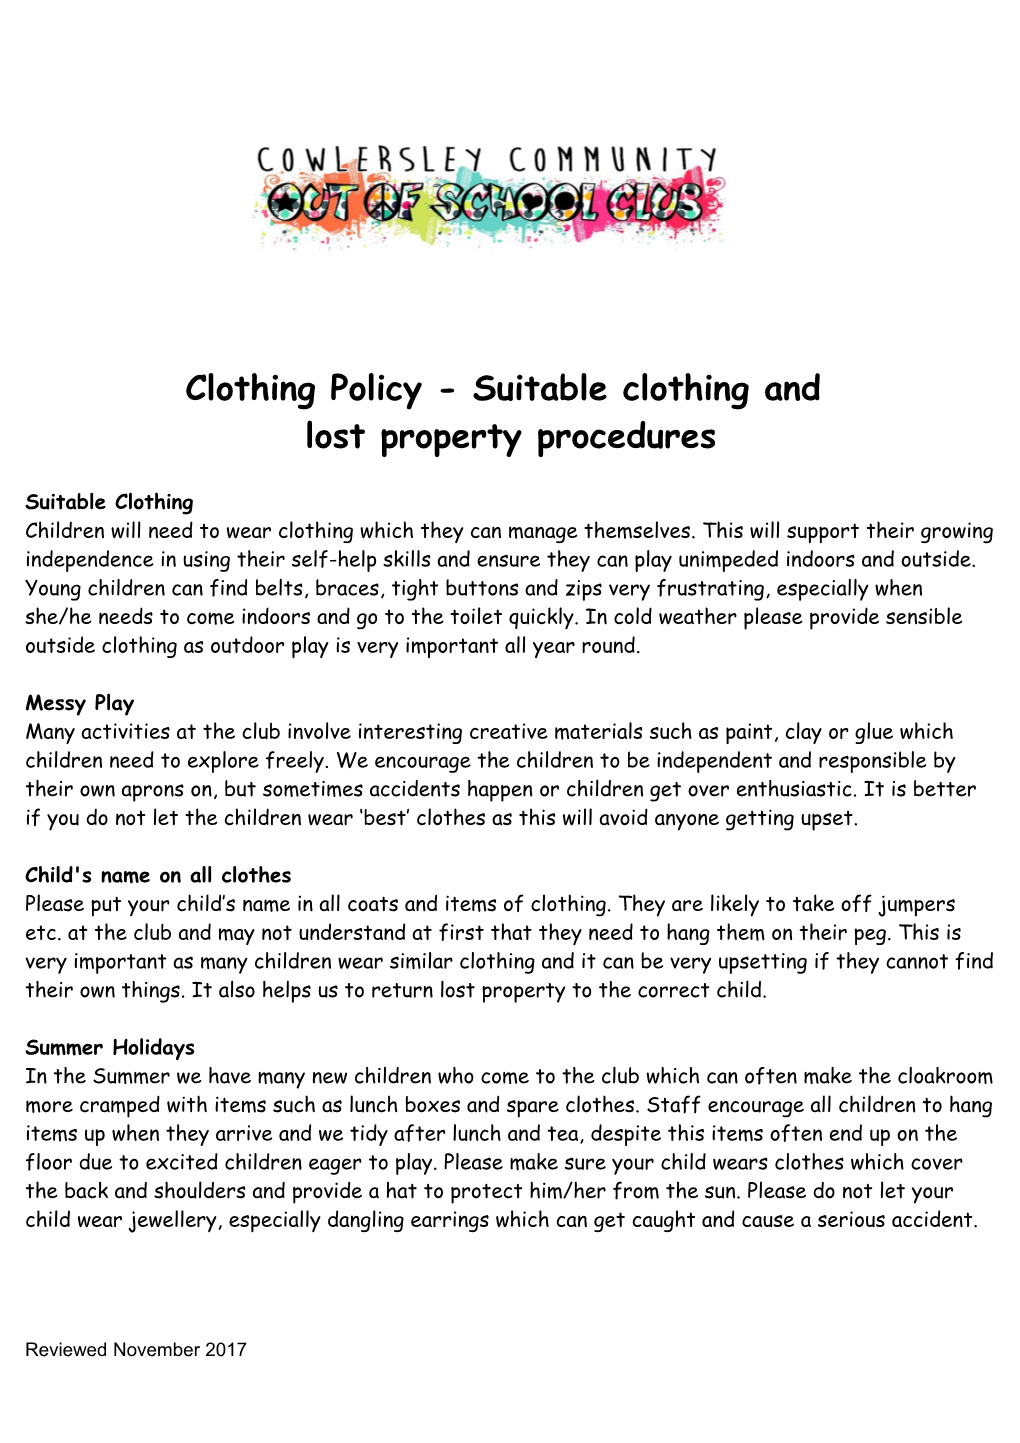 Clothing Policy - Suitable Clothing And